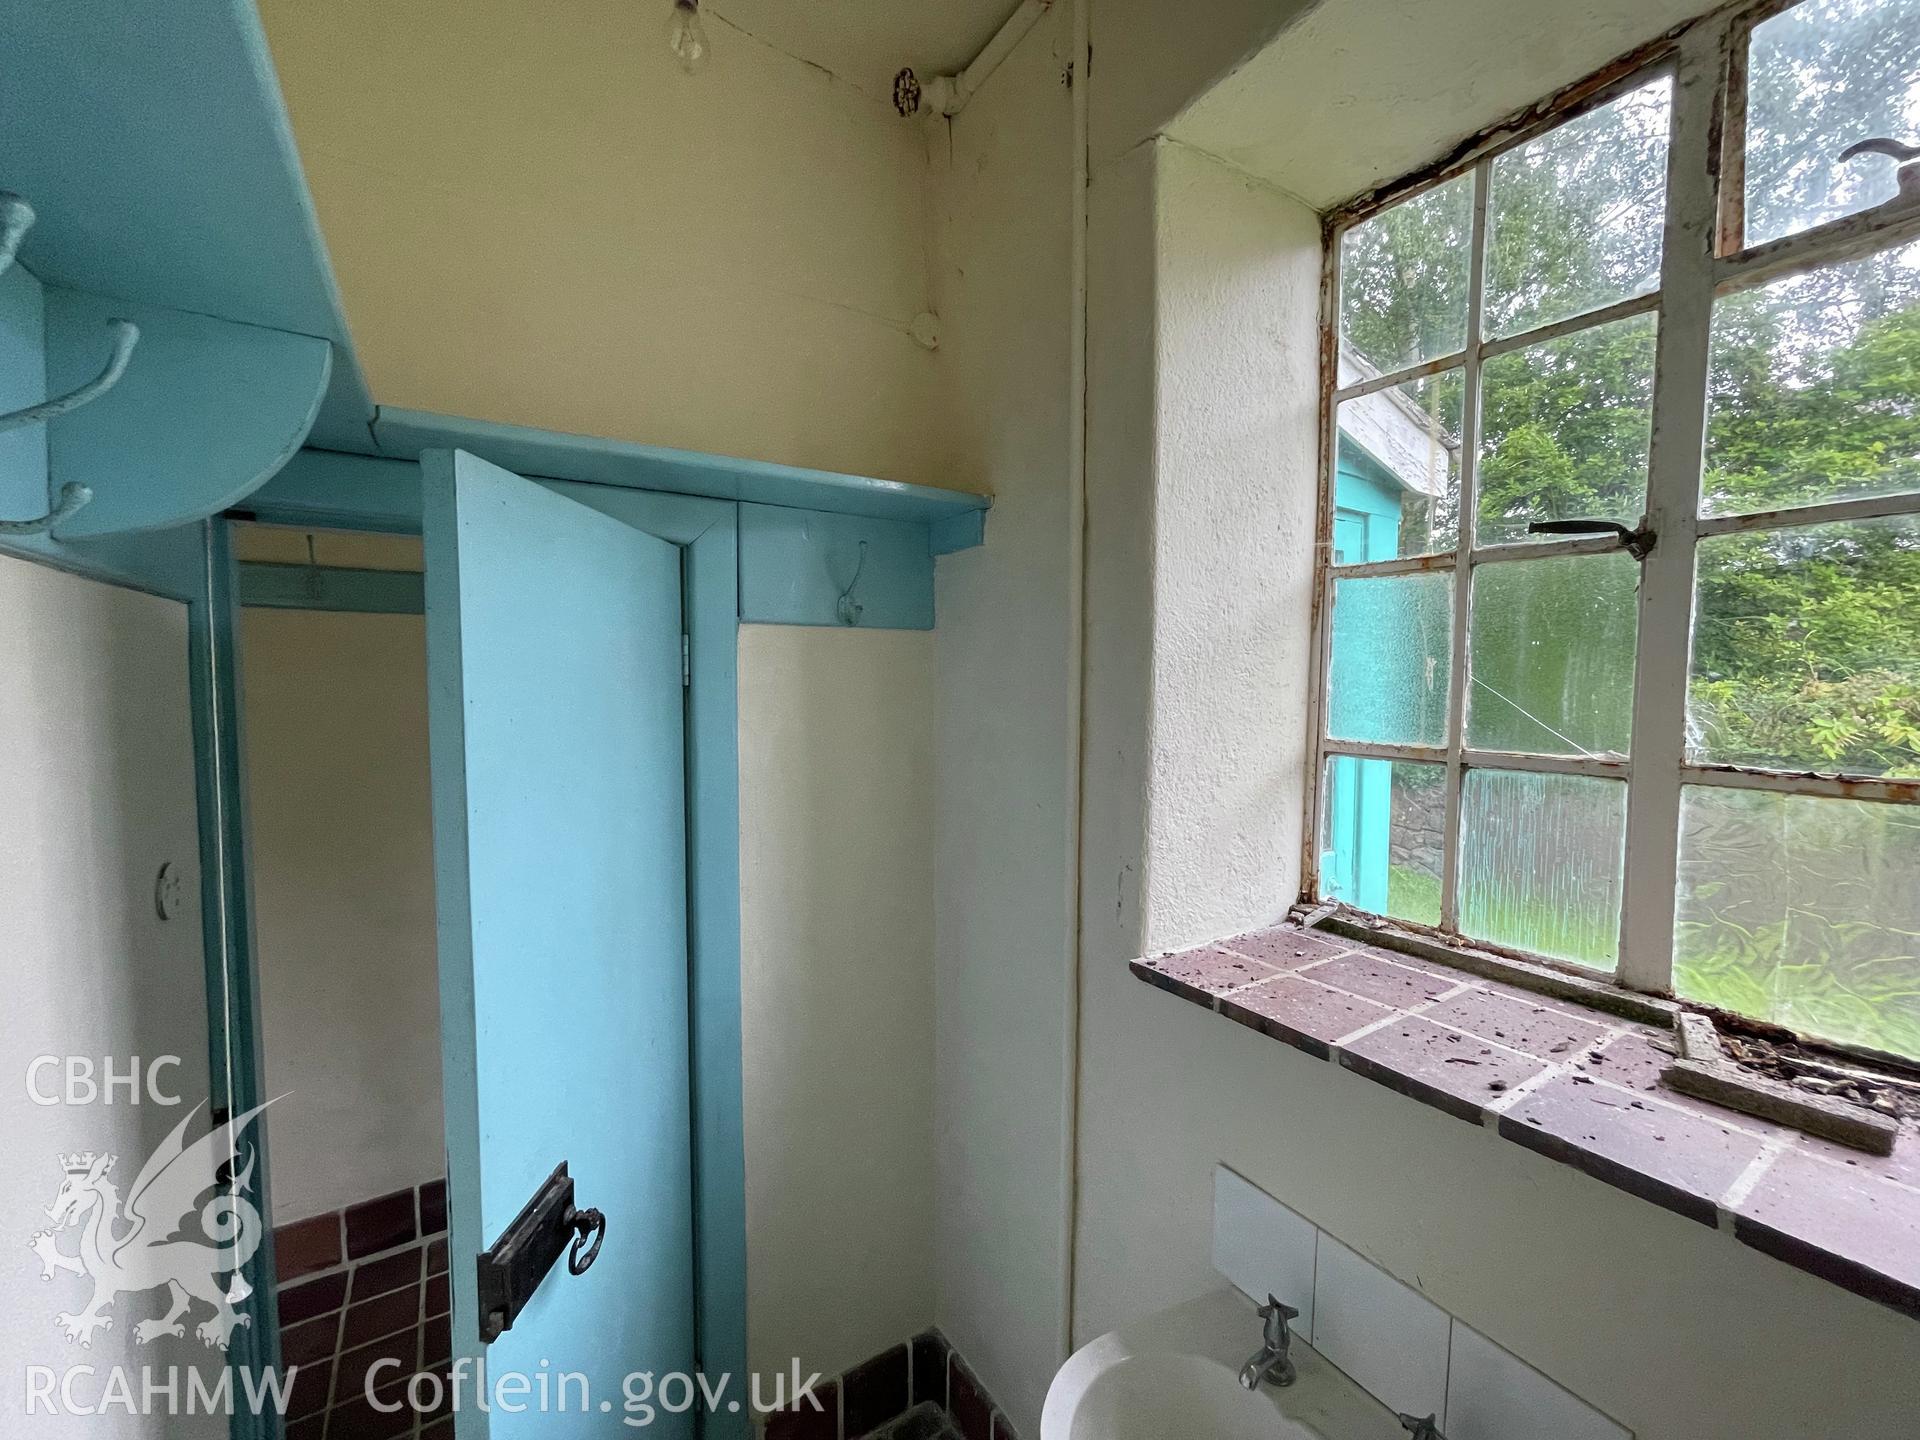 Colour photograph showing male lavatory facing east  - part of a photographic record relating to Moriah Chapel, Llanystumdwy, produced as a condition of planning consent (Planning Reference C21/0420/41/LL; Gwynedd Council).